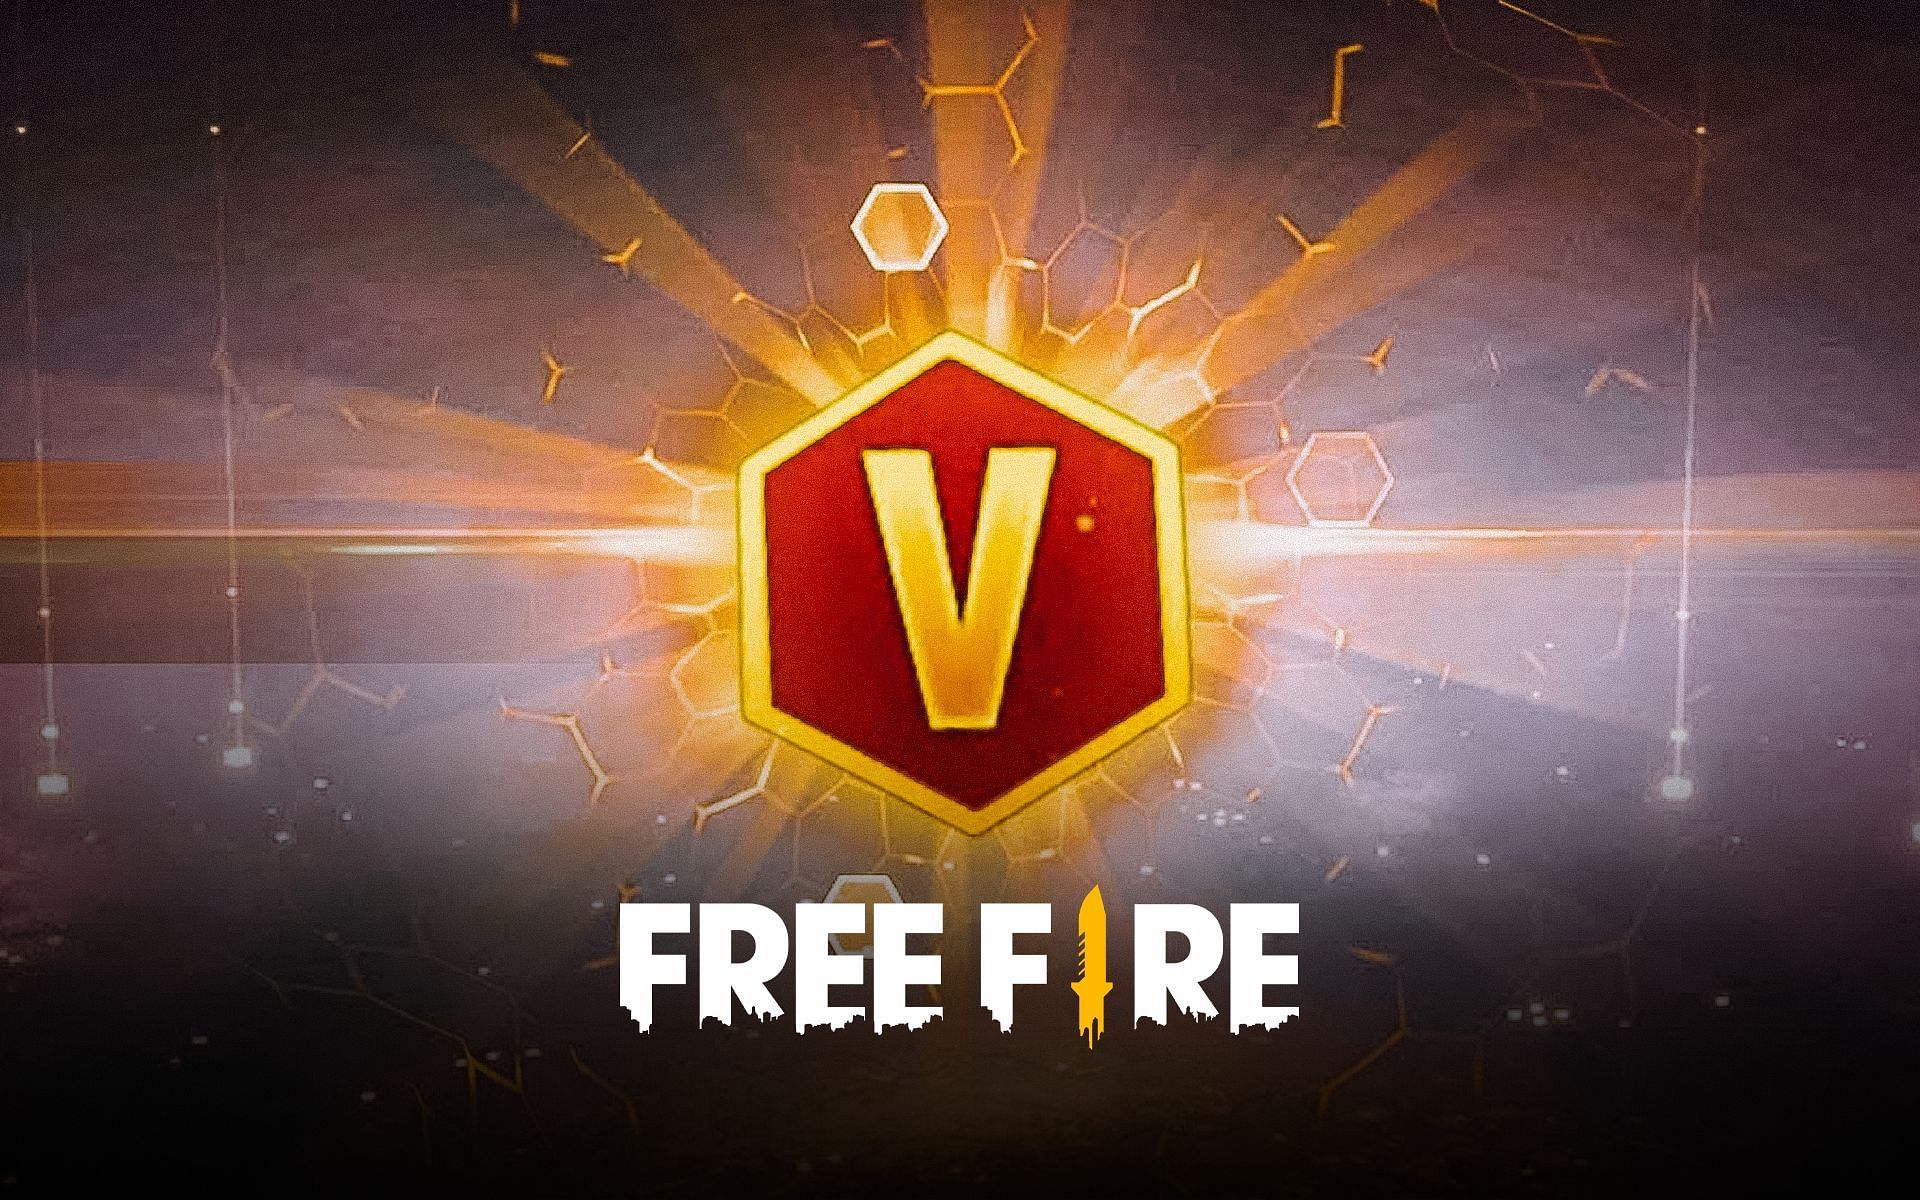 V Badge is something that many Free Fire players wish to attain (Image via Free Fire)